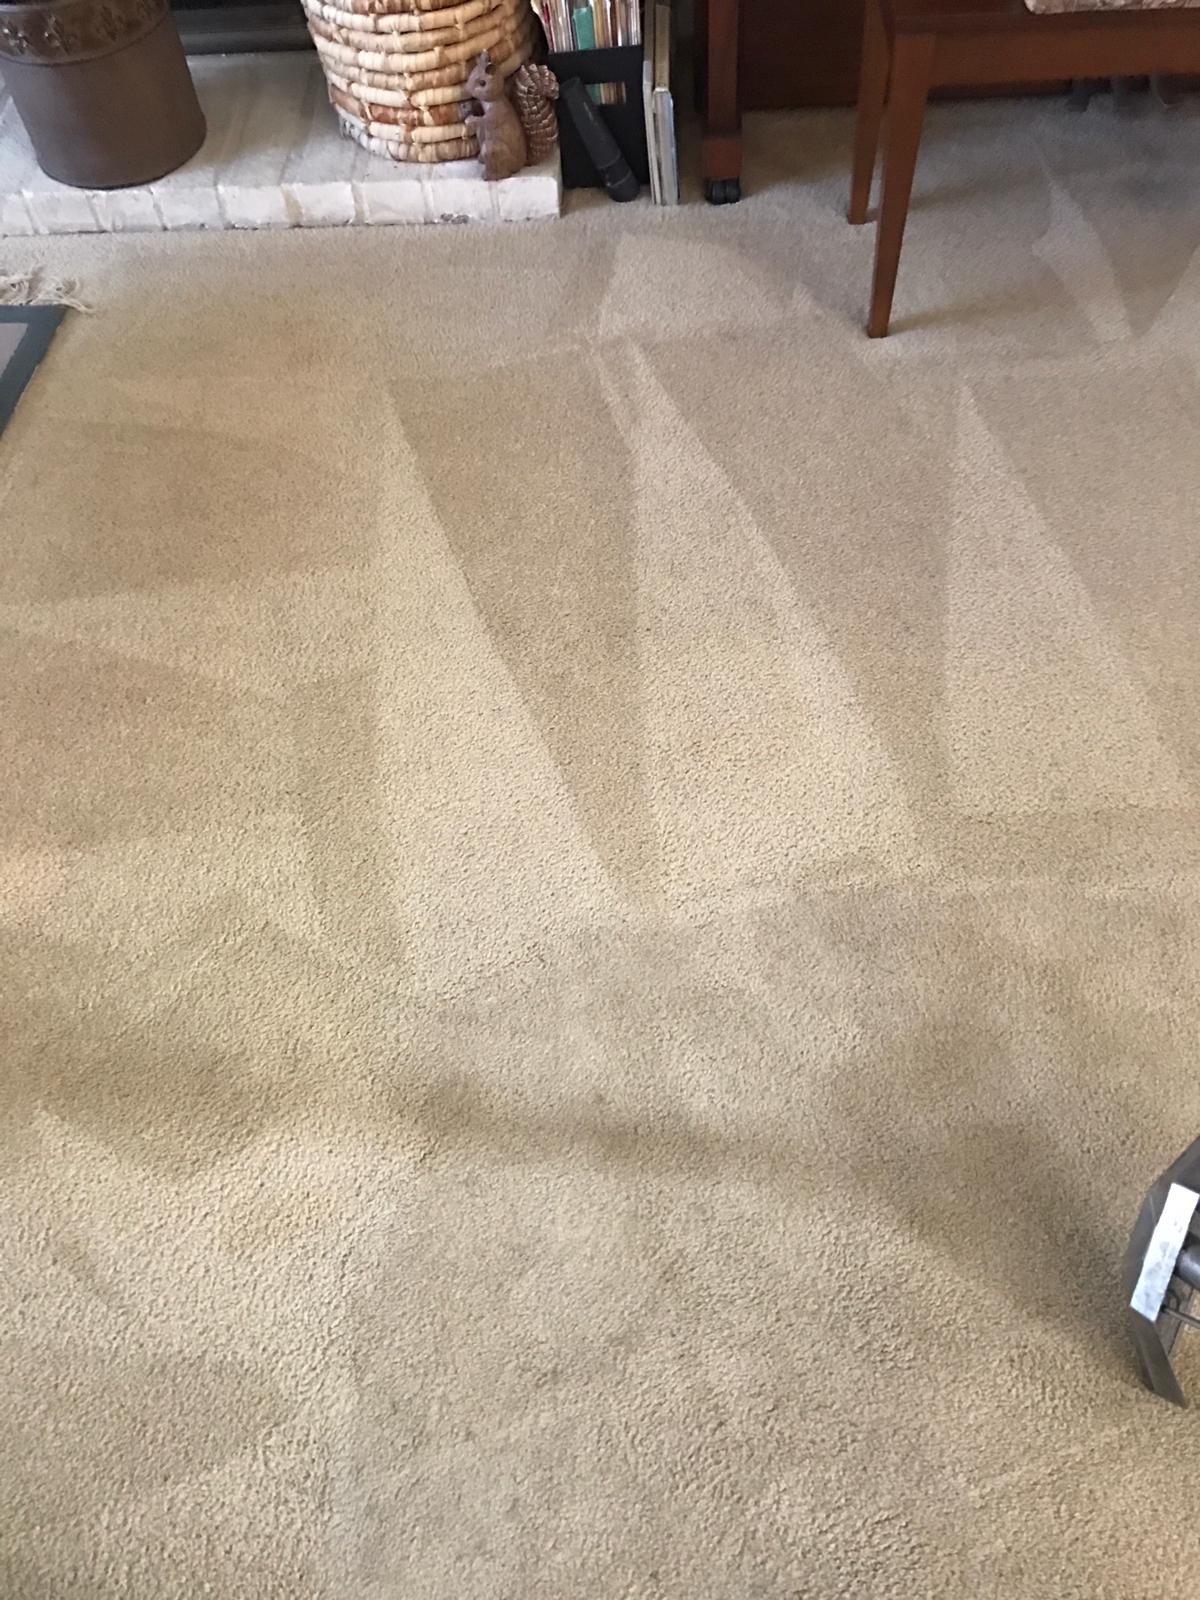 Carpet Cleaning Happy Valley OR - Nicholas Carpet Care